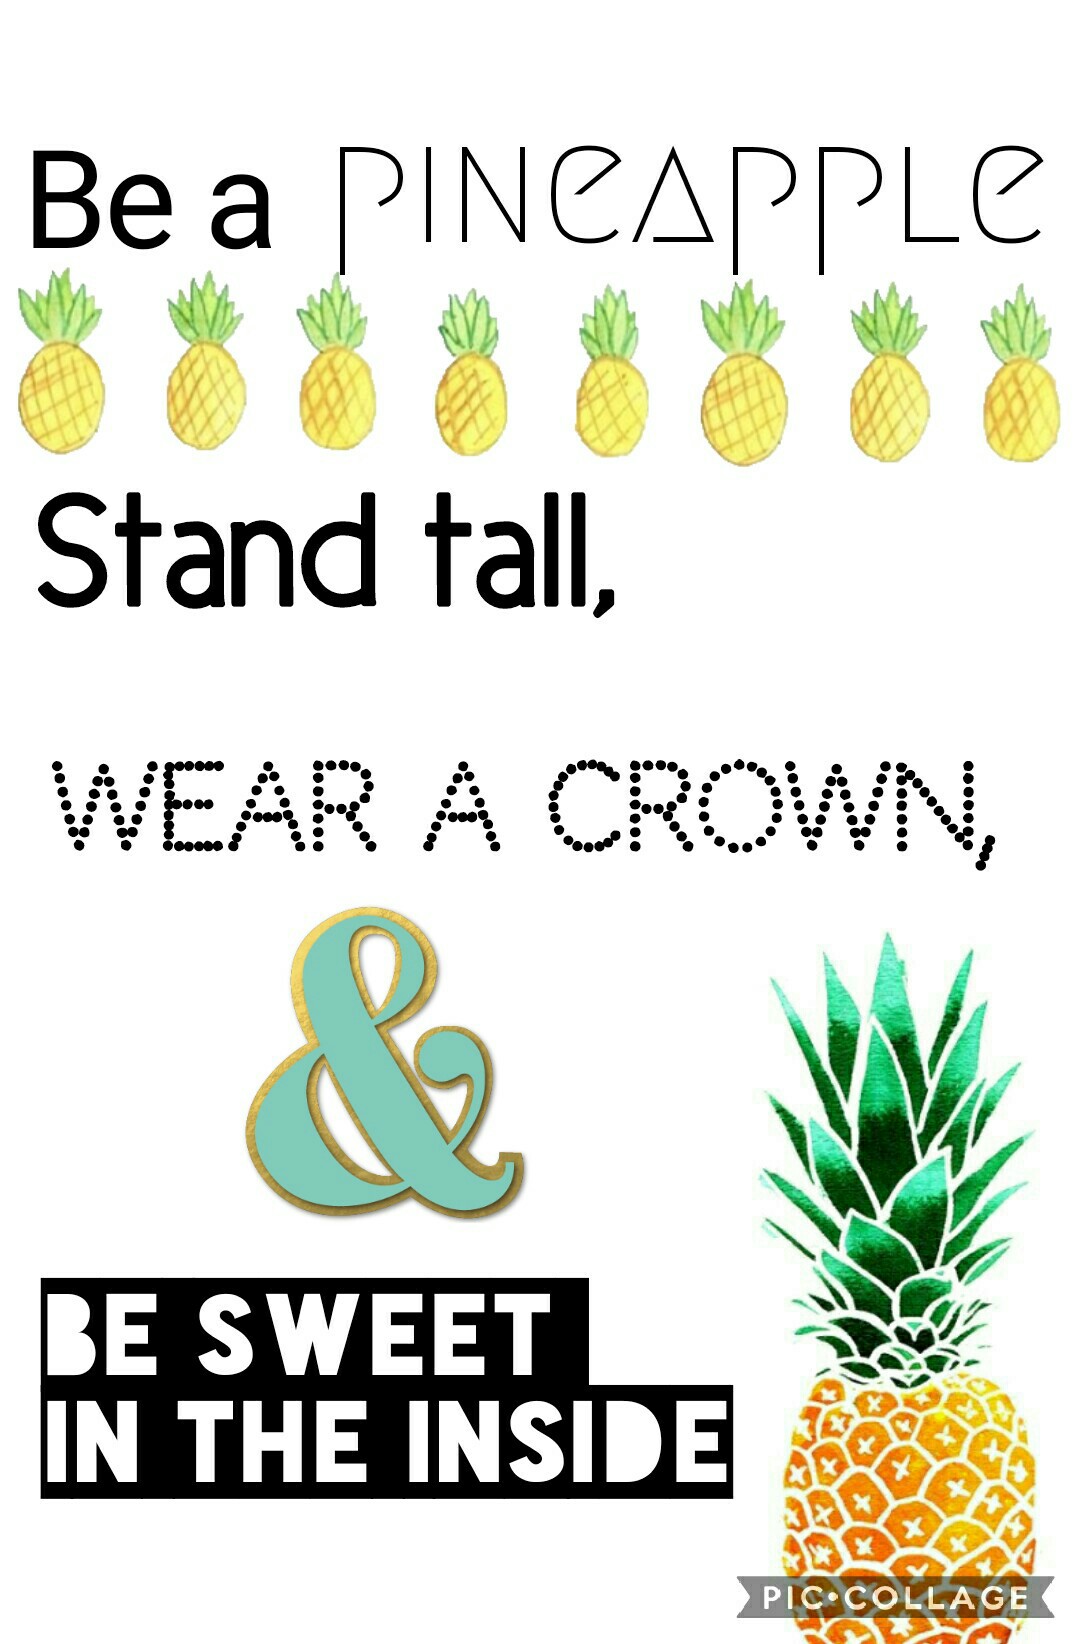 Be a pineapple🍍🍍